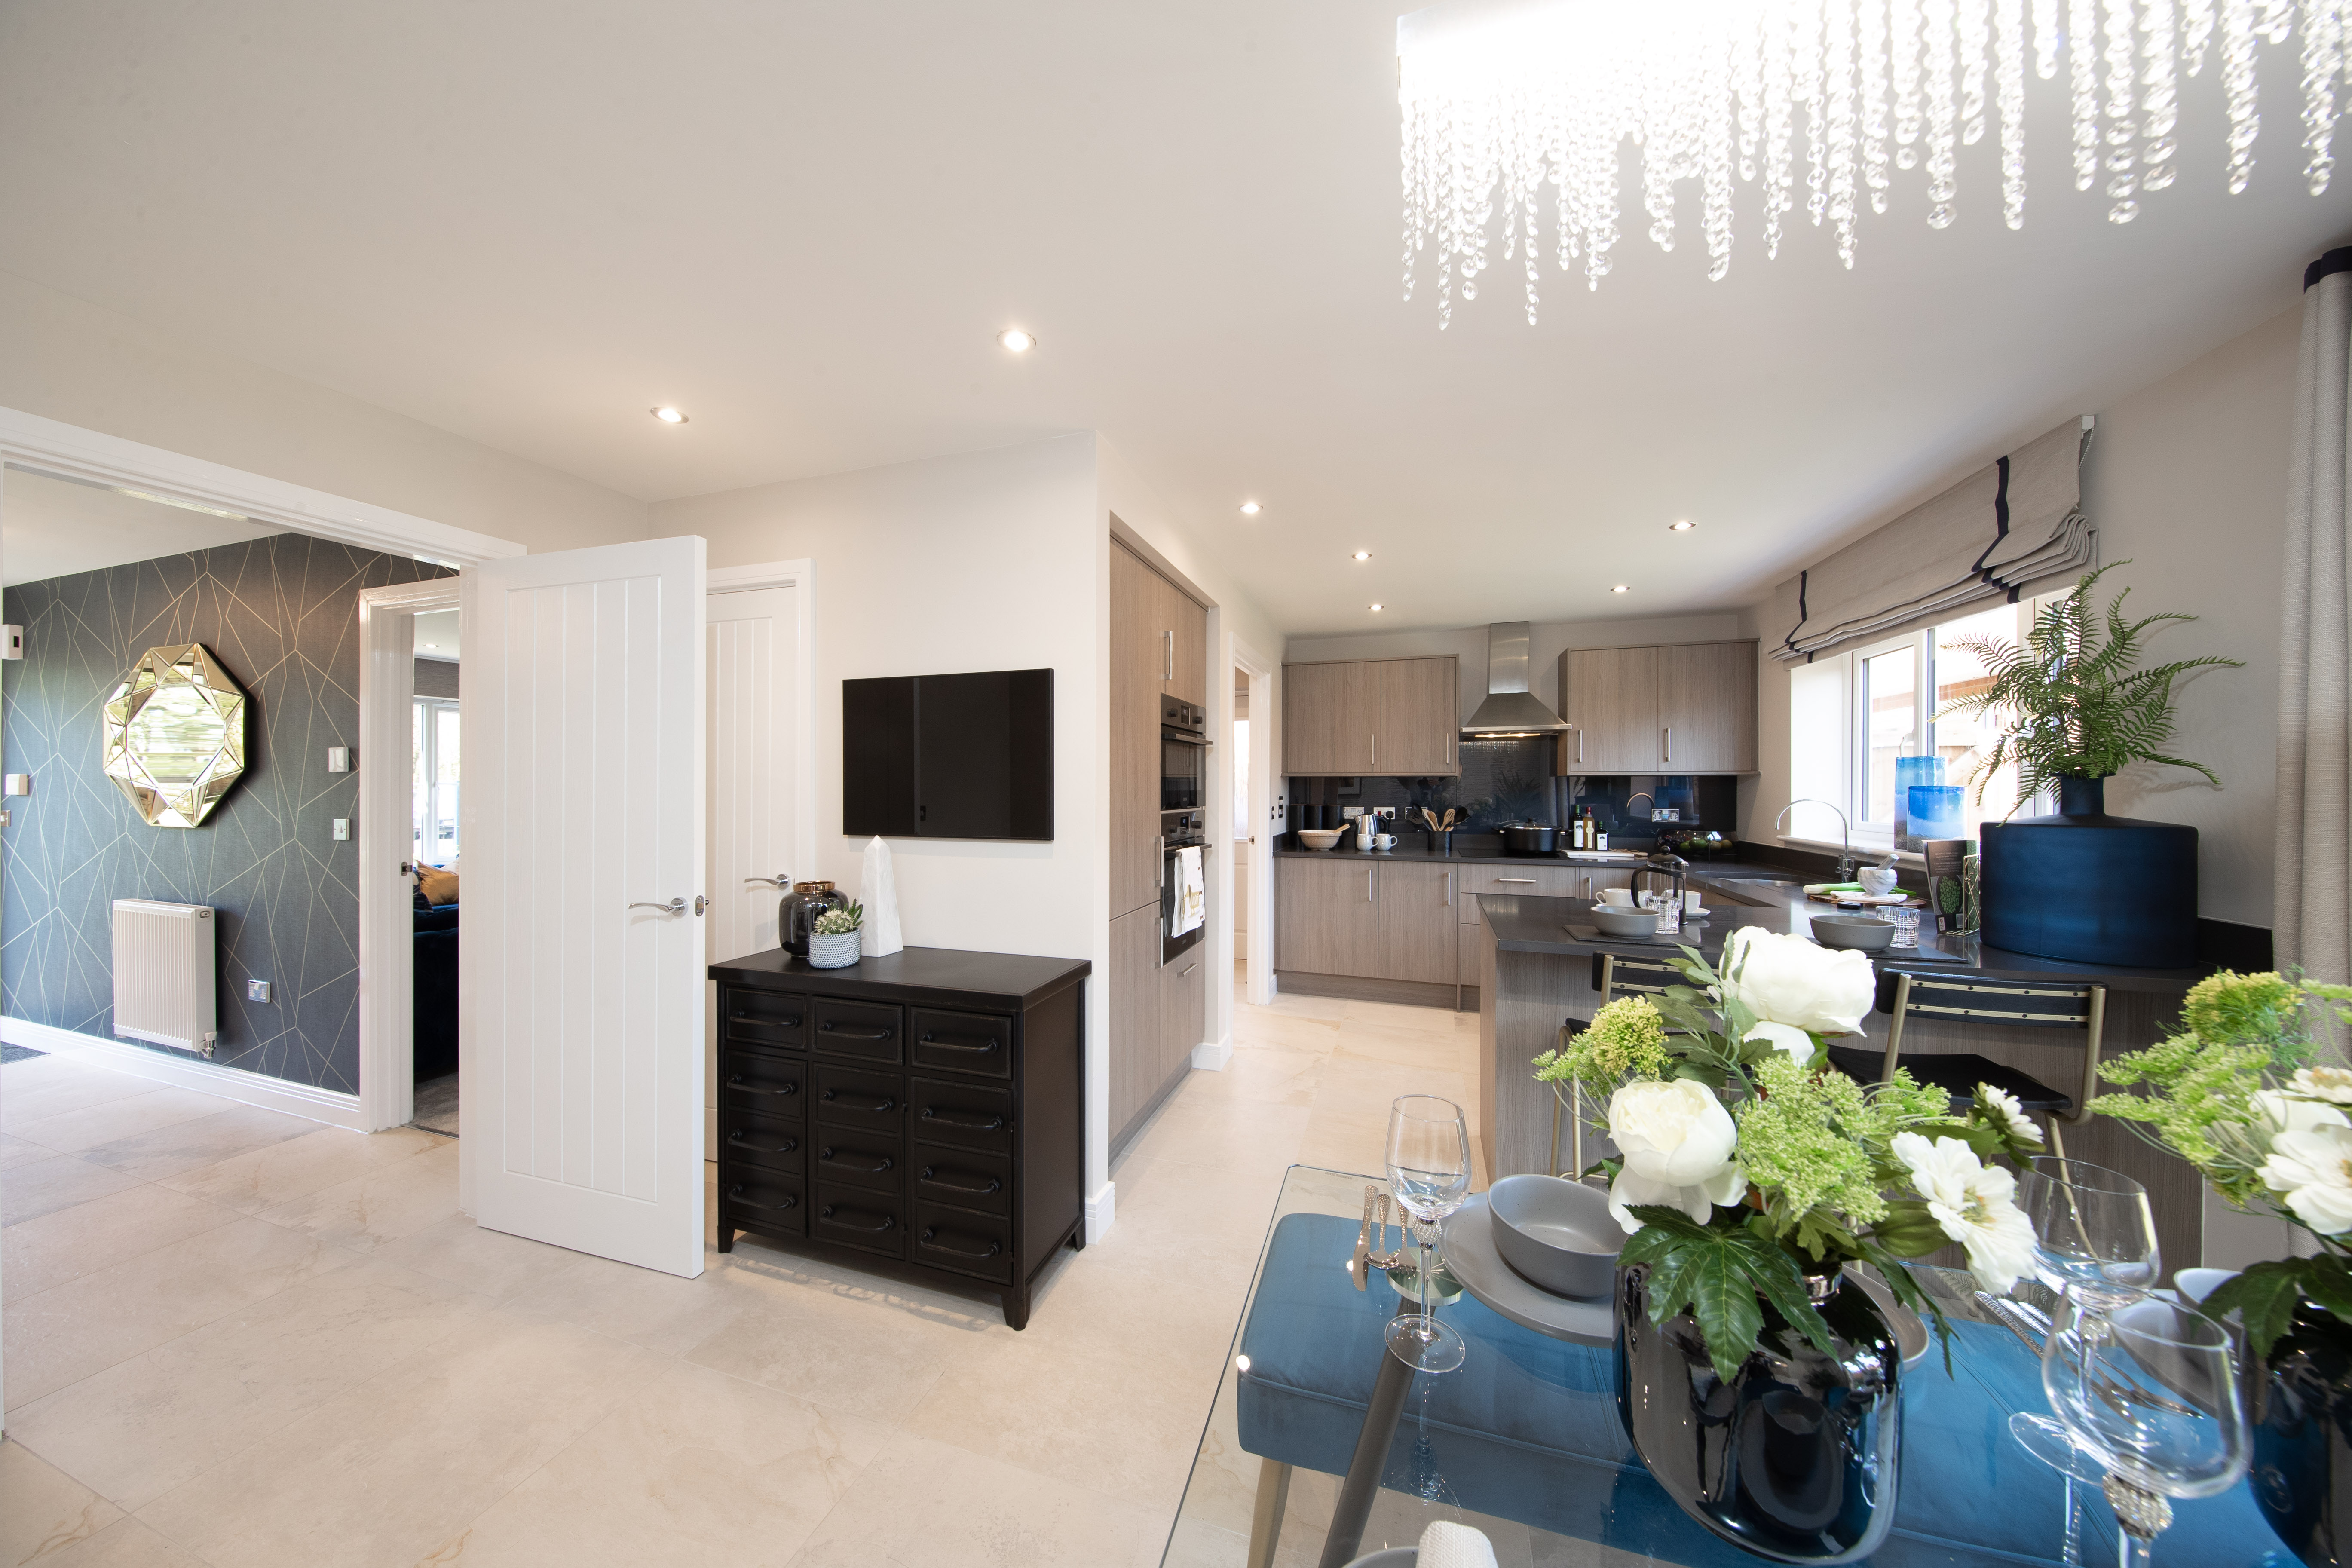 Property 1 of 25. Showhome Imagery